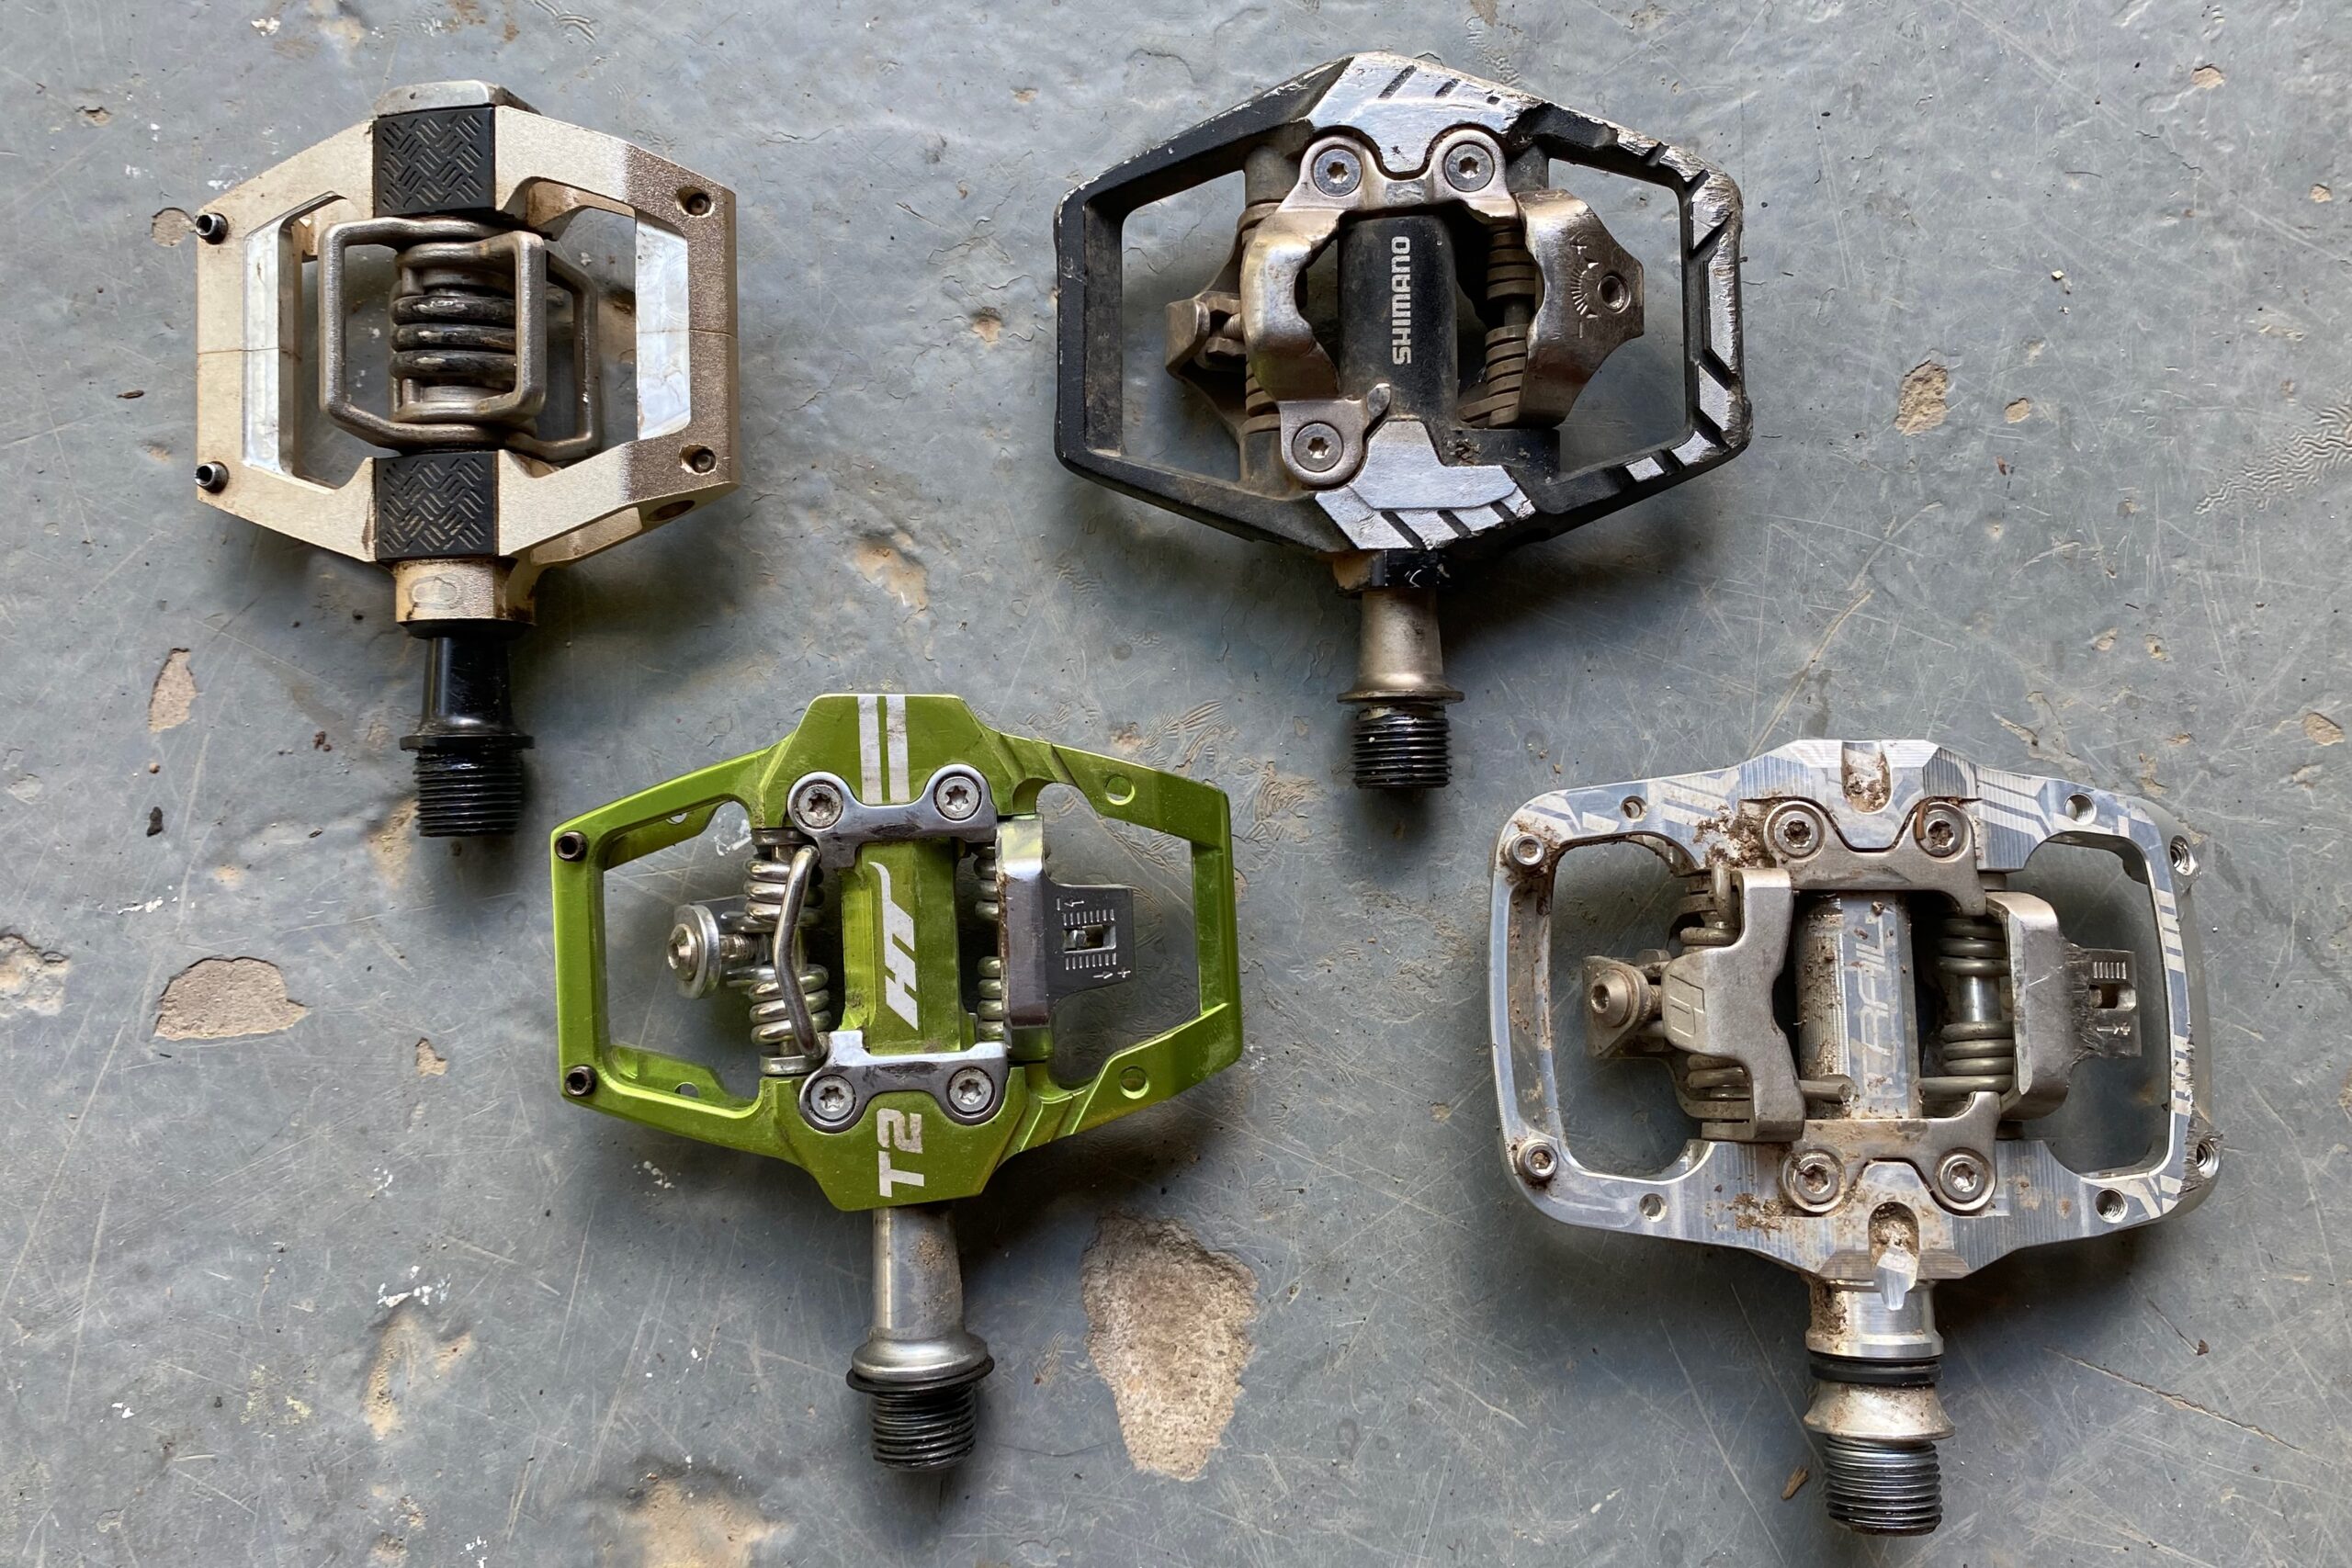 Examples of mountain bike pedals for trail riding